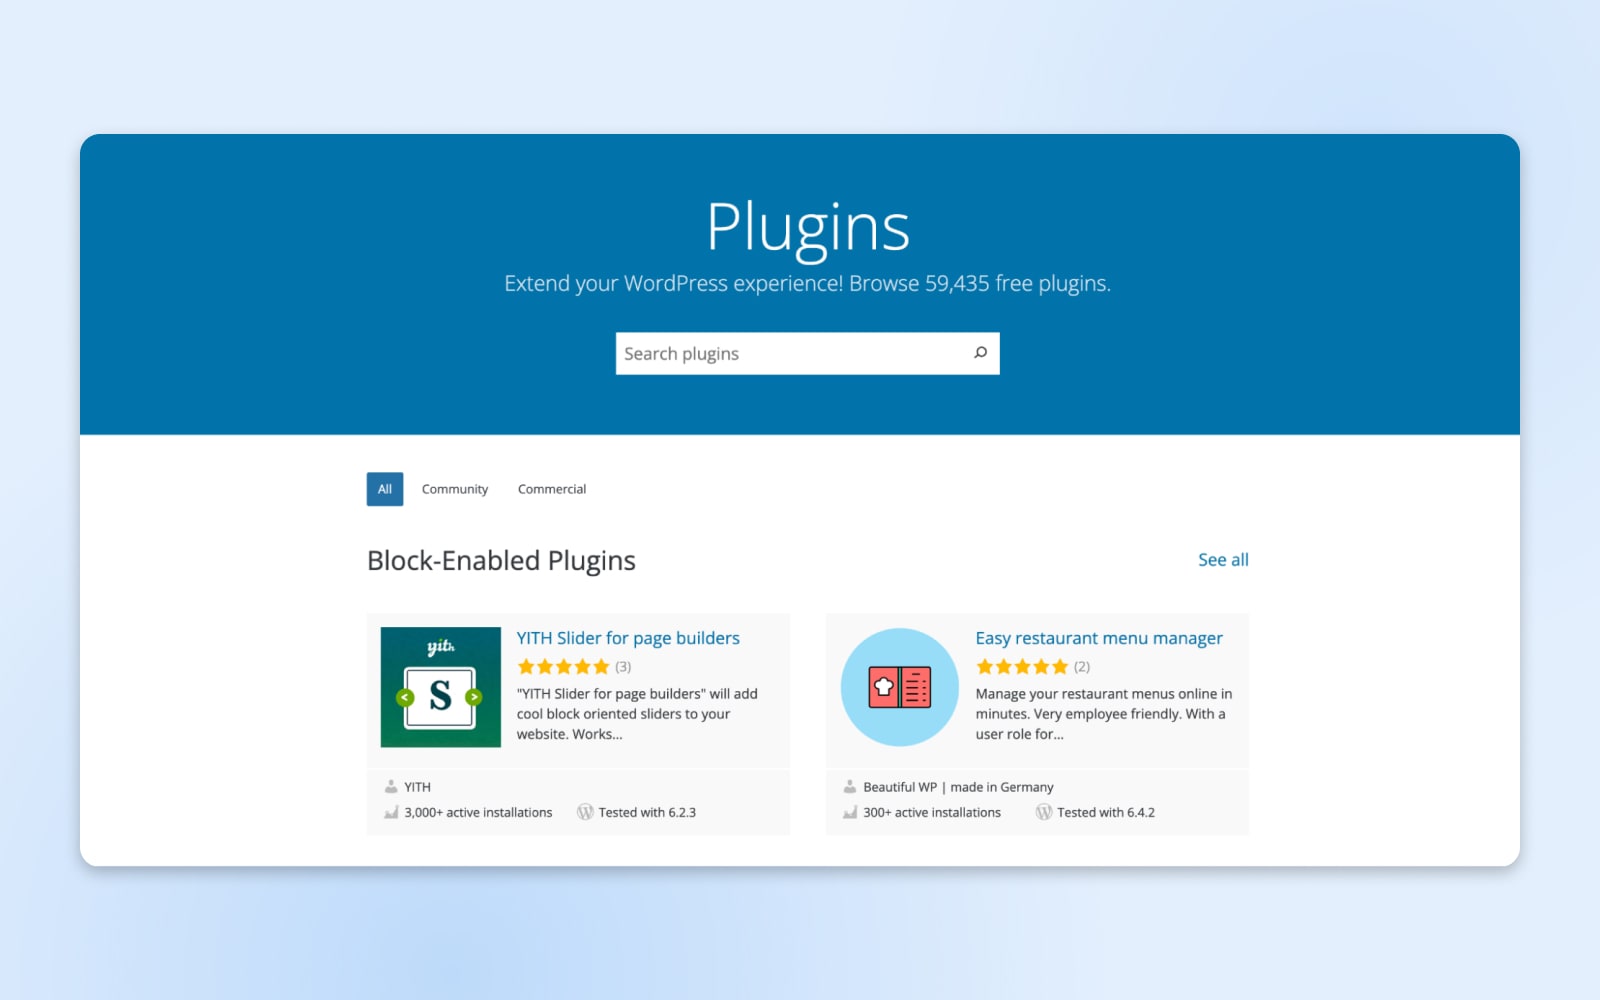 screenshot of WordPress plugins, featuring YITH Slider for page builders and Easy restaurant menu manager